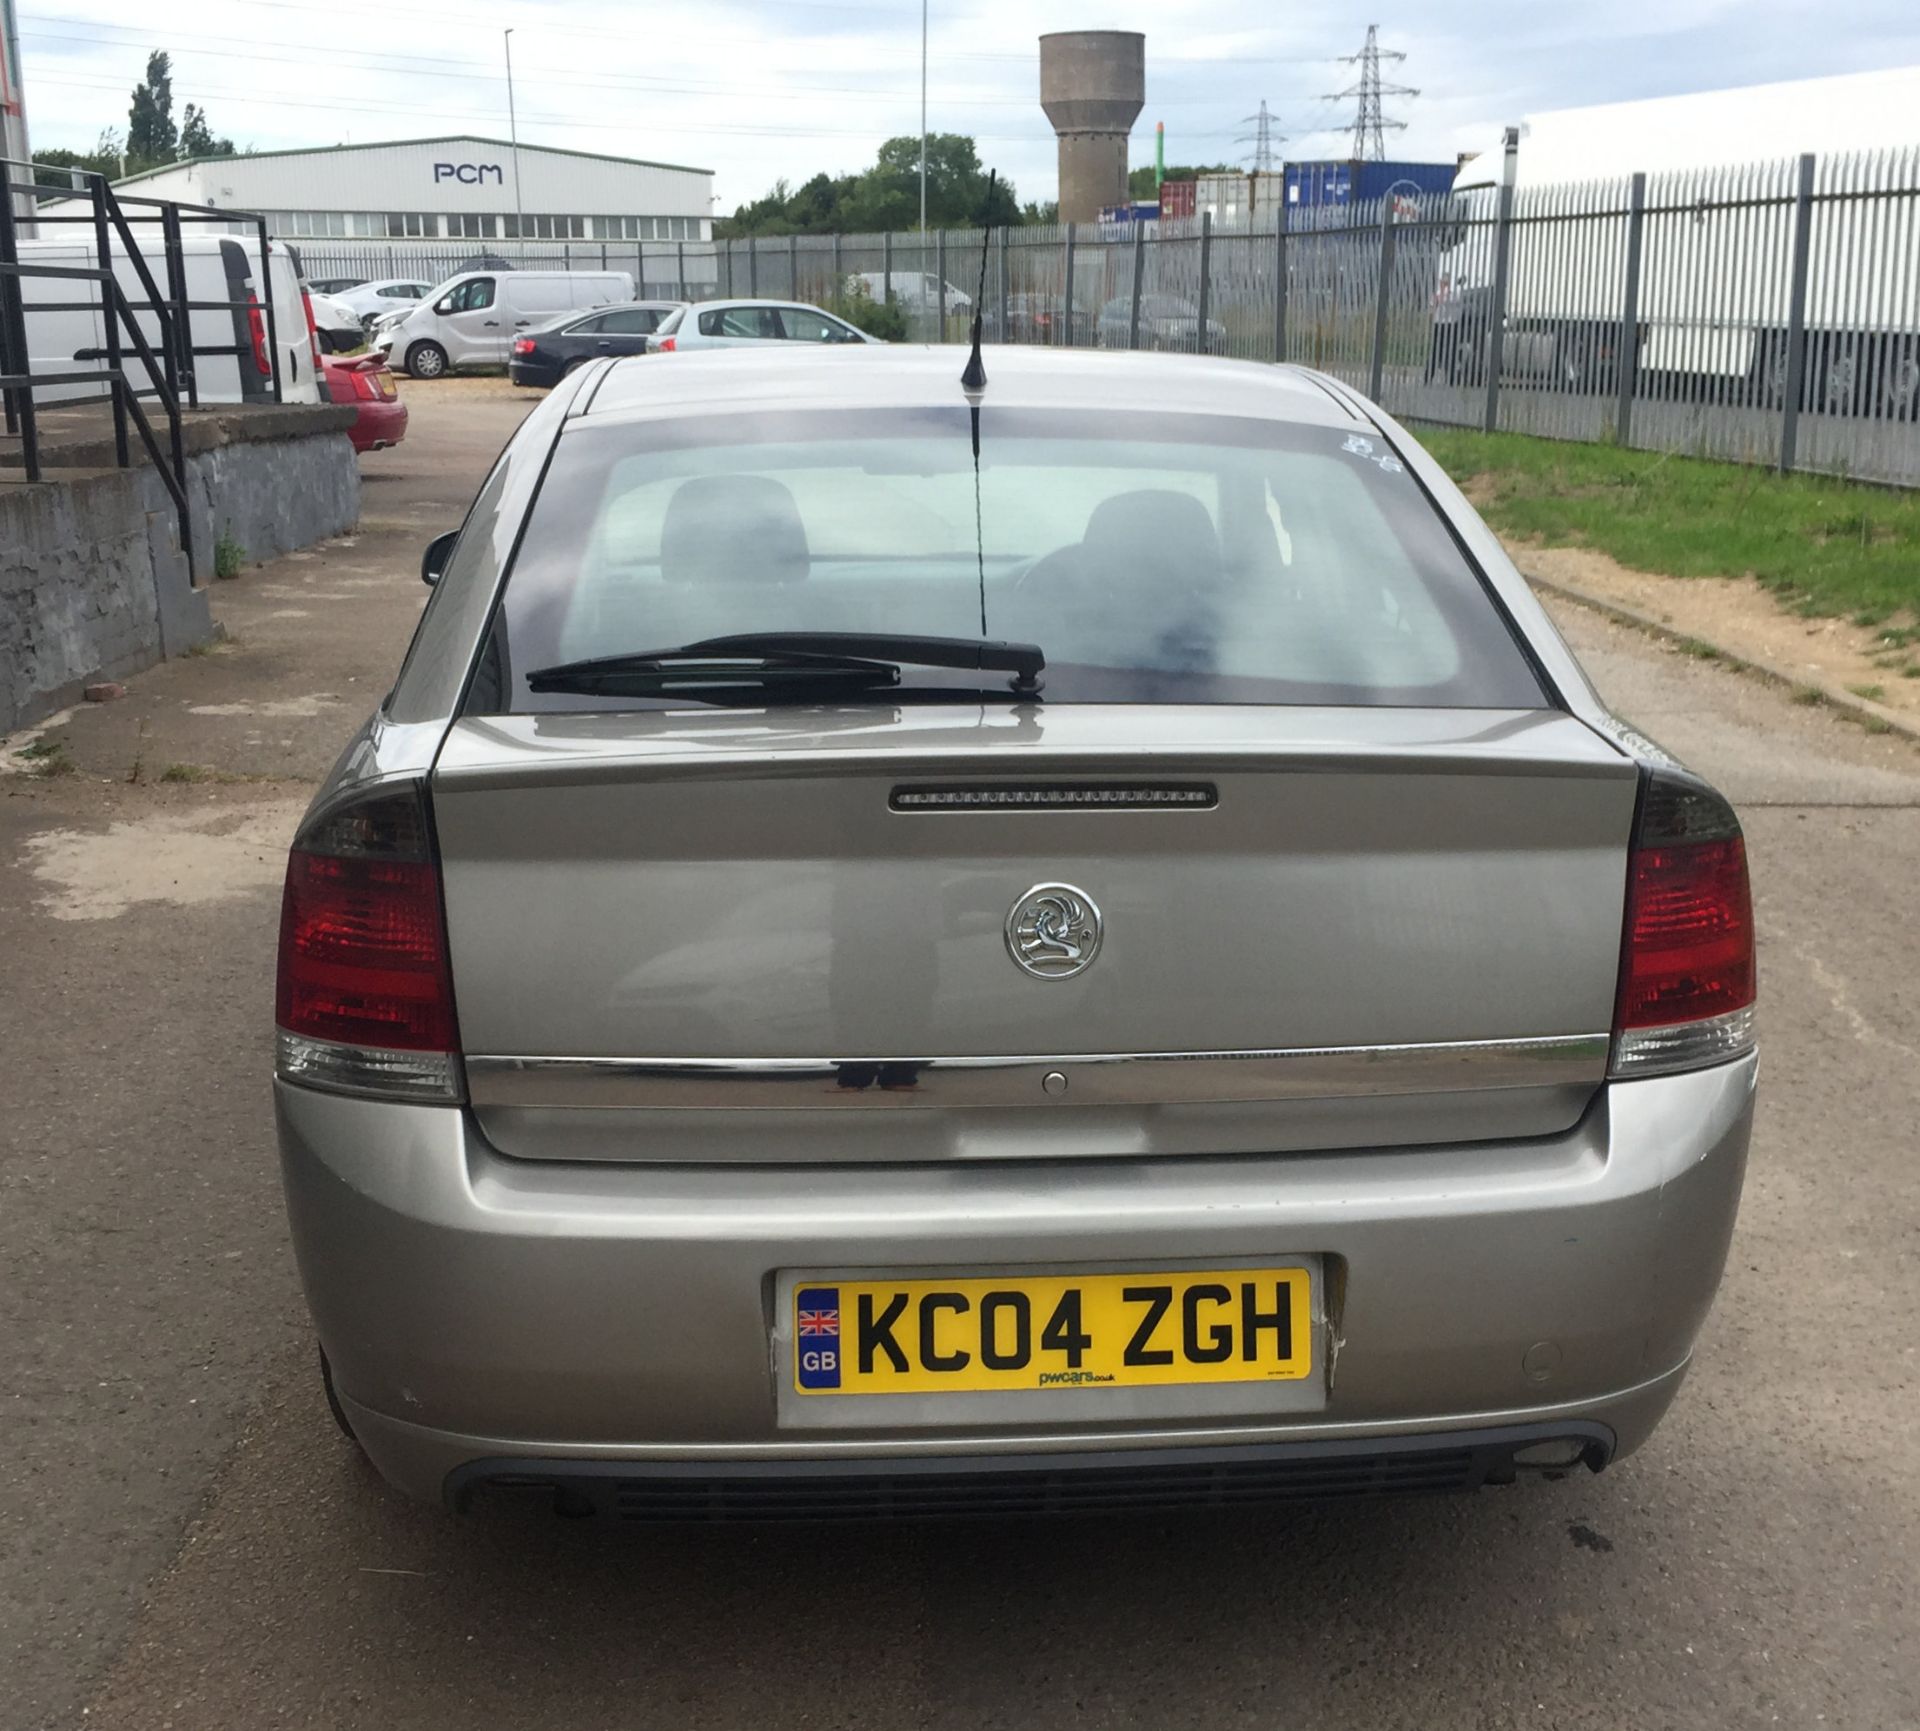 2004 Vauxhall Vectra 2.2 Sri Automatic 4 Dr Saloon - CL505 - NO VAT ON THE HAMMER - Location: Corby, - Image 3 of 7